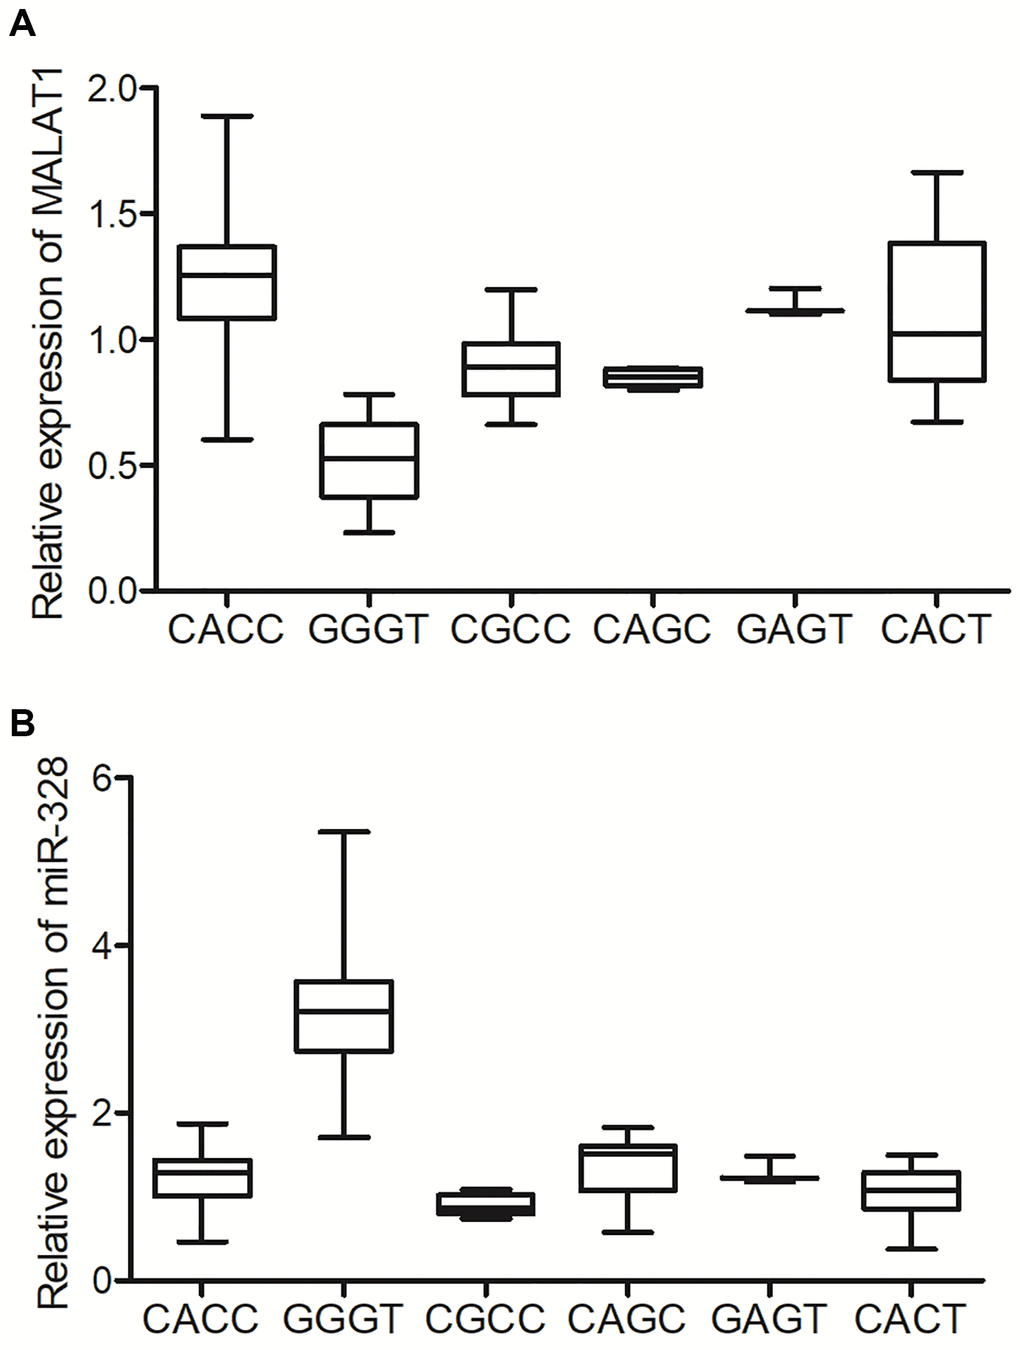 The GGGT genotype of MALAT1 was correlated with suppressed expression of MALAT1 and elevated expression of miR-328 in the peripheral blood of lung cancer patients. (A) The expression of MALAT1 was suppressed in the peripheral blood of lung cancer patients carrying the GGGT genotype of MALAT1. (B) The expression of miR-328 was activated in the peripheral blood of lung cancer patients carrying the GGGT genotype of MALAT1.